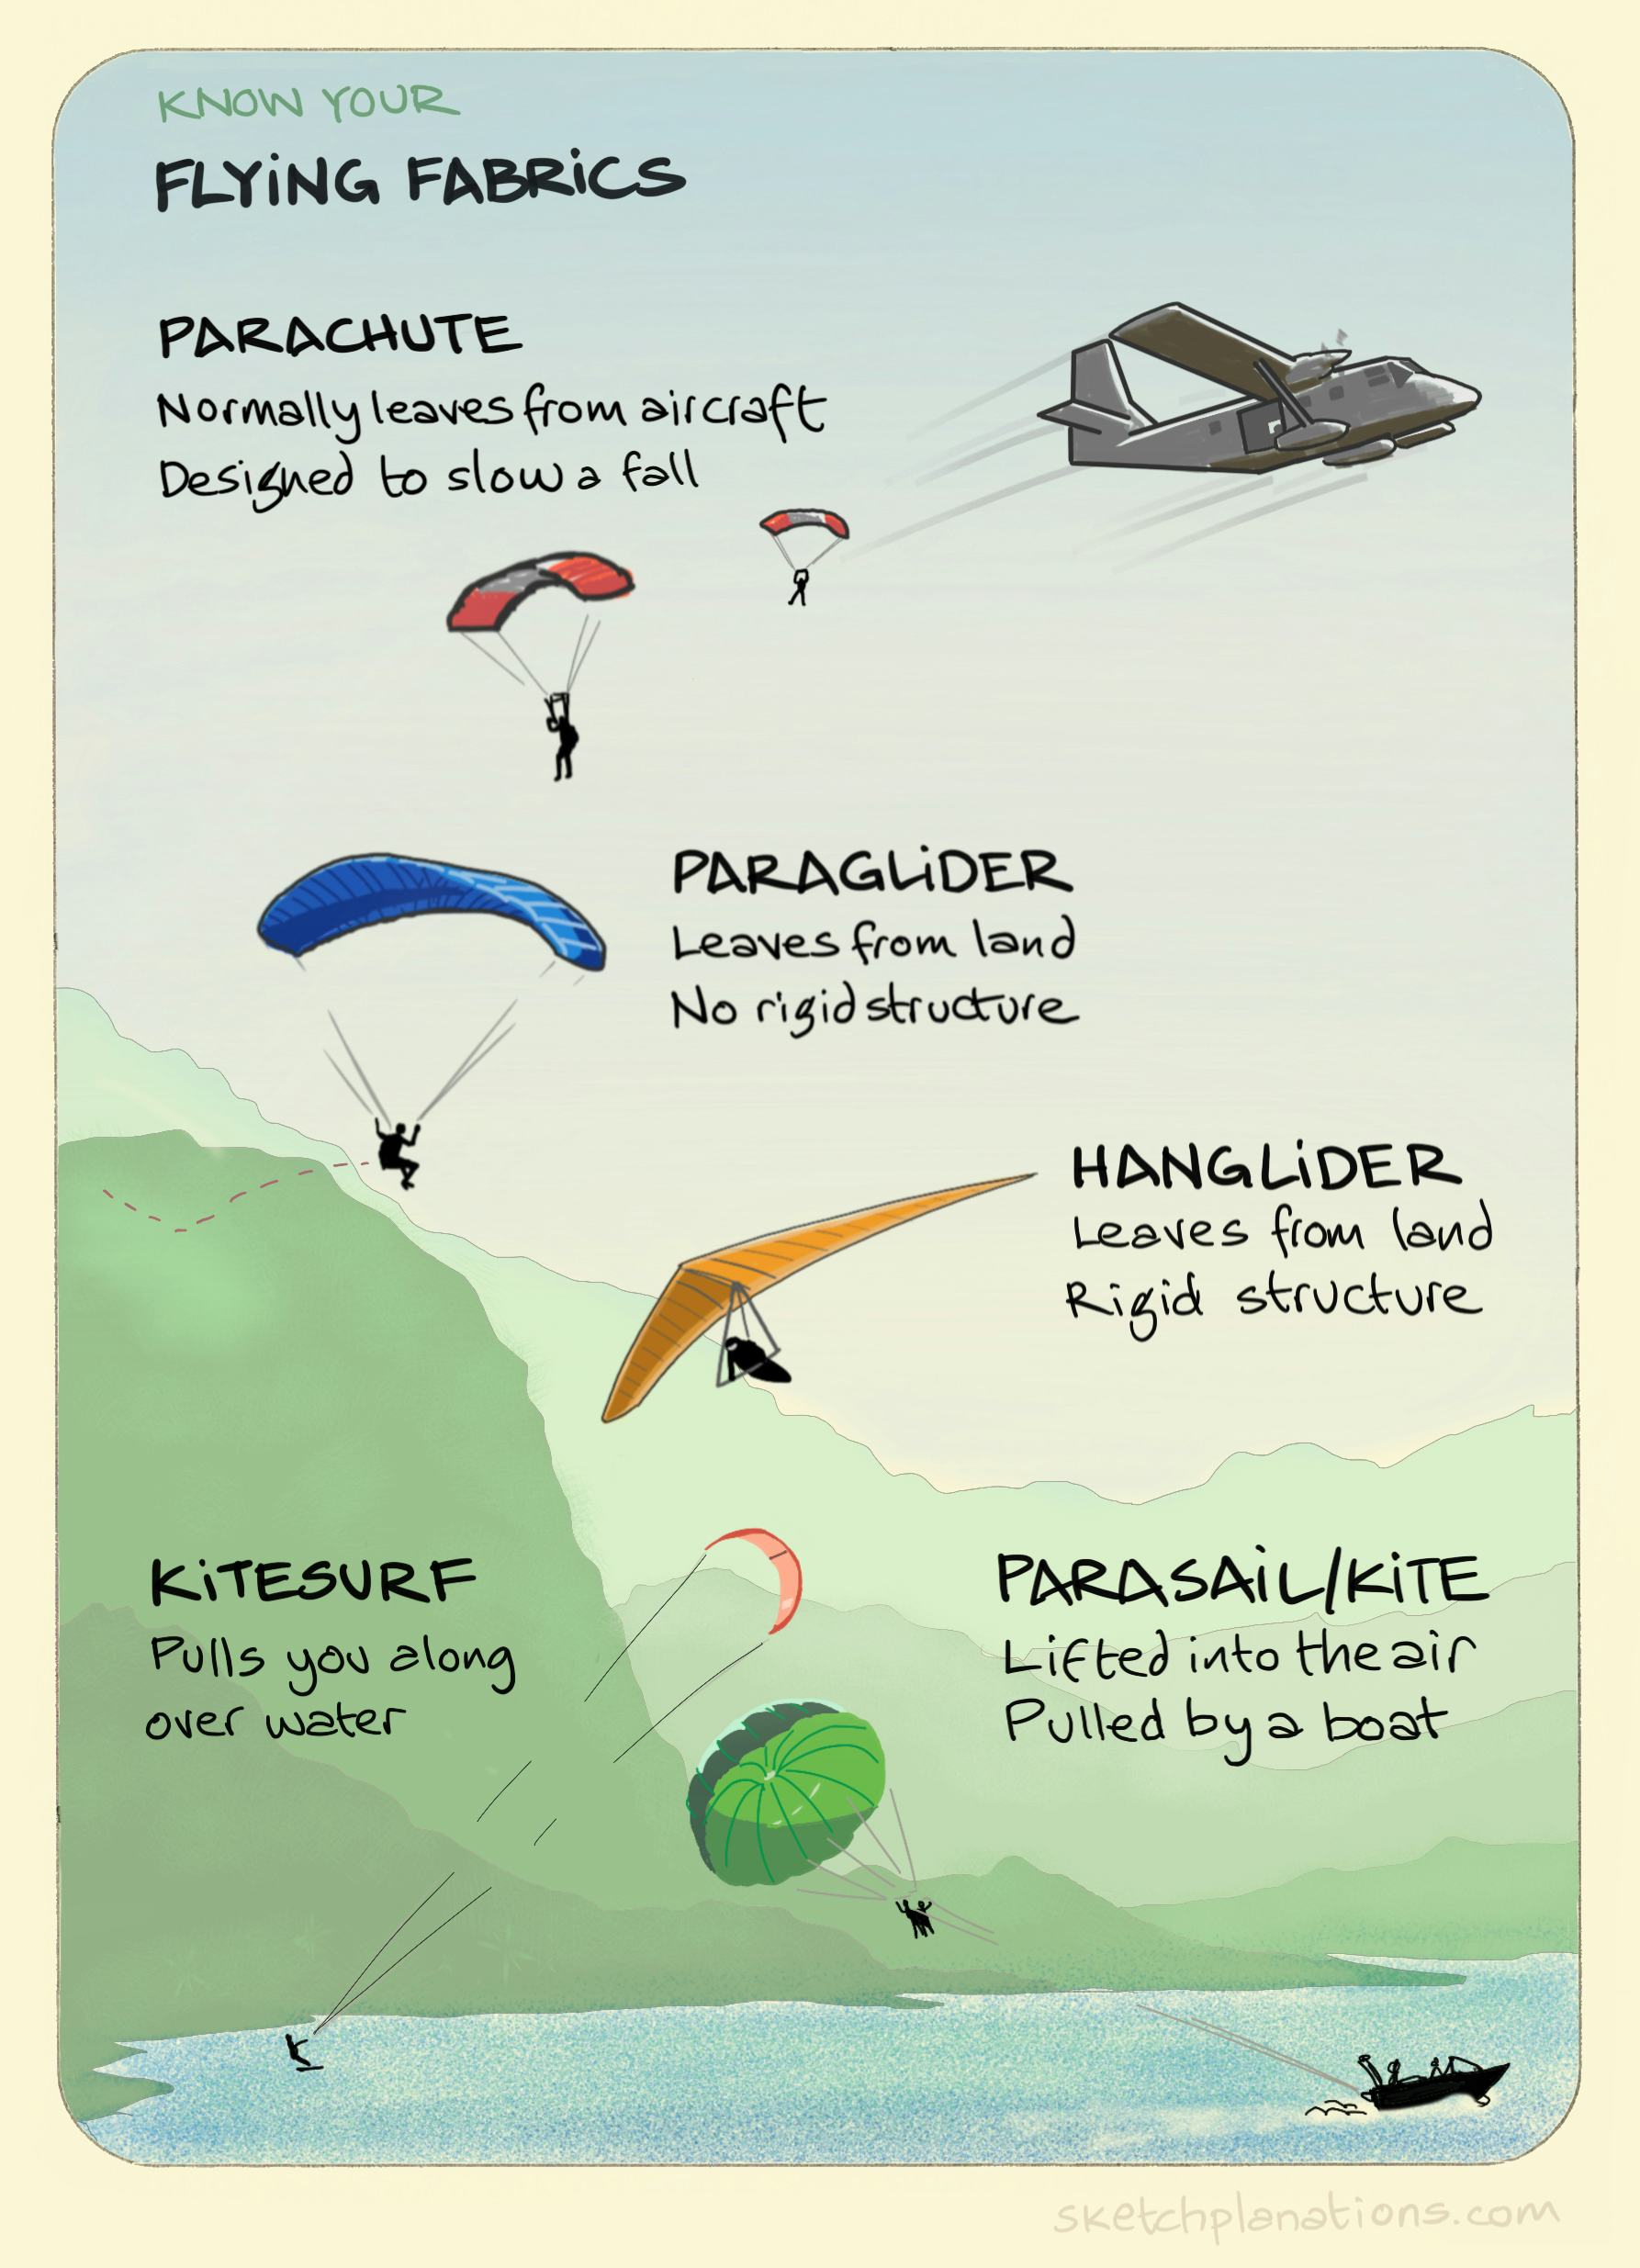 Know your flying fabrics - Sketchplanations